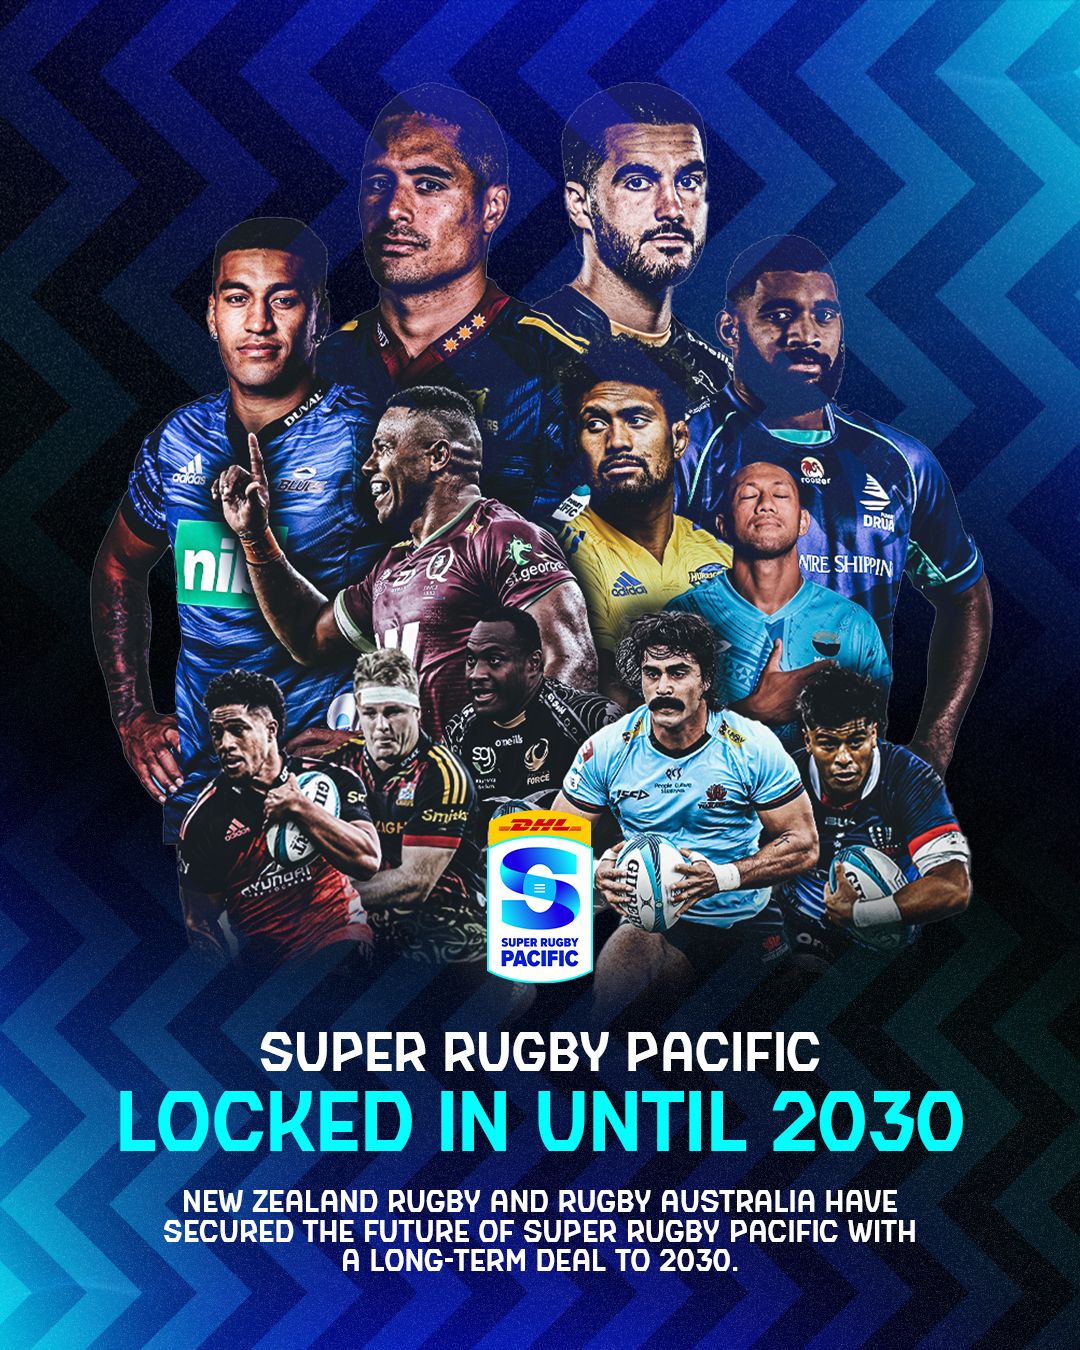 Super Rugby Pacific locked in until 2030